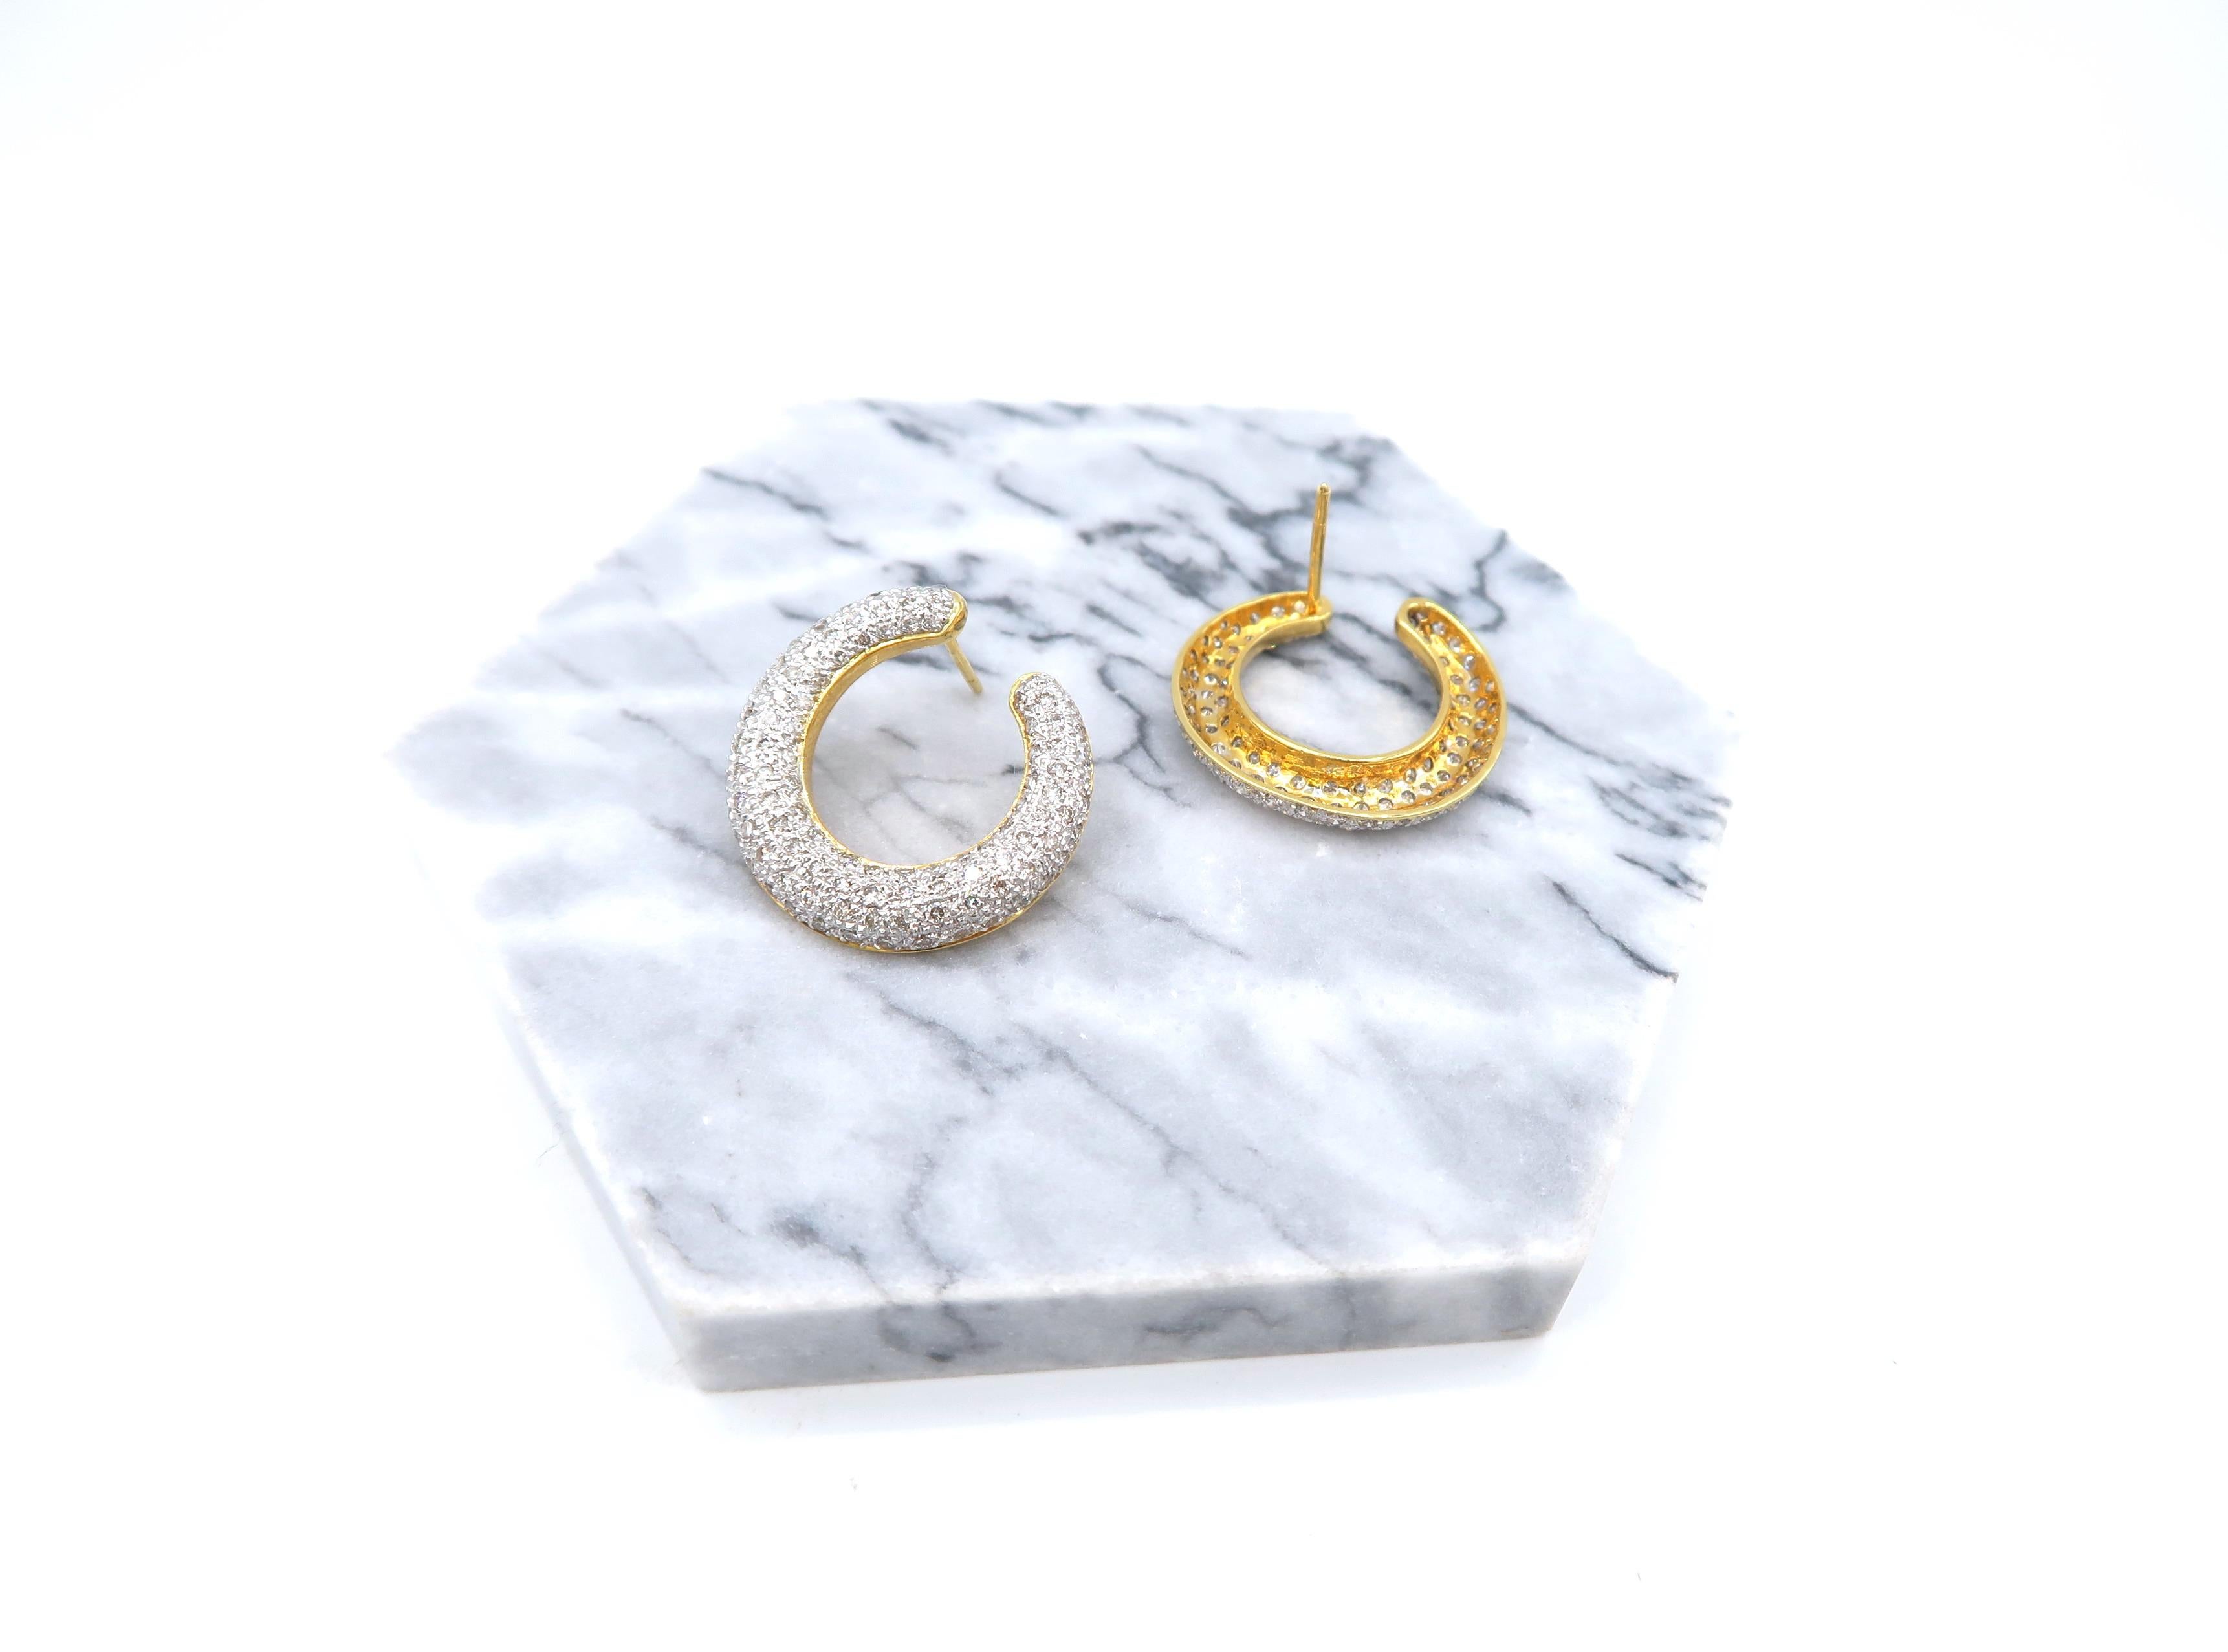 Ensō -- Embossed open circle ink stroke , pavé set with white diamond all over.

Minimal.
Elegant.
and 
Enlightening.

Diamond: 2.78ct.
Gold: 18K Yellow Gold 10.74g.